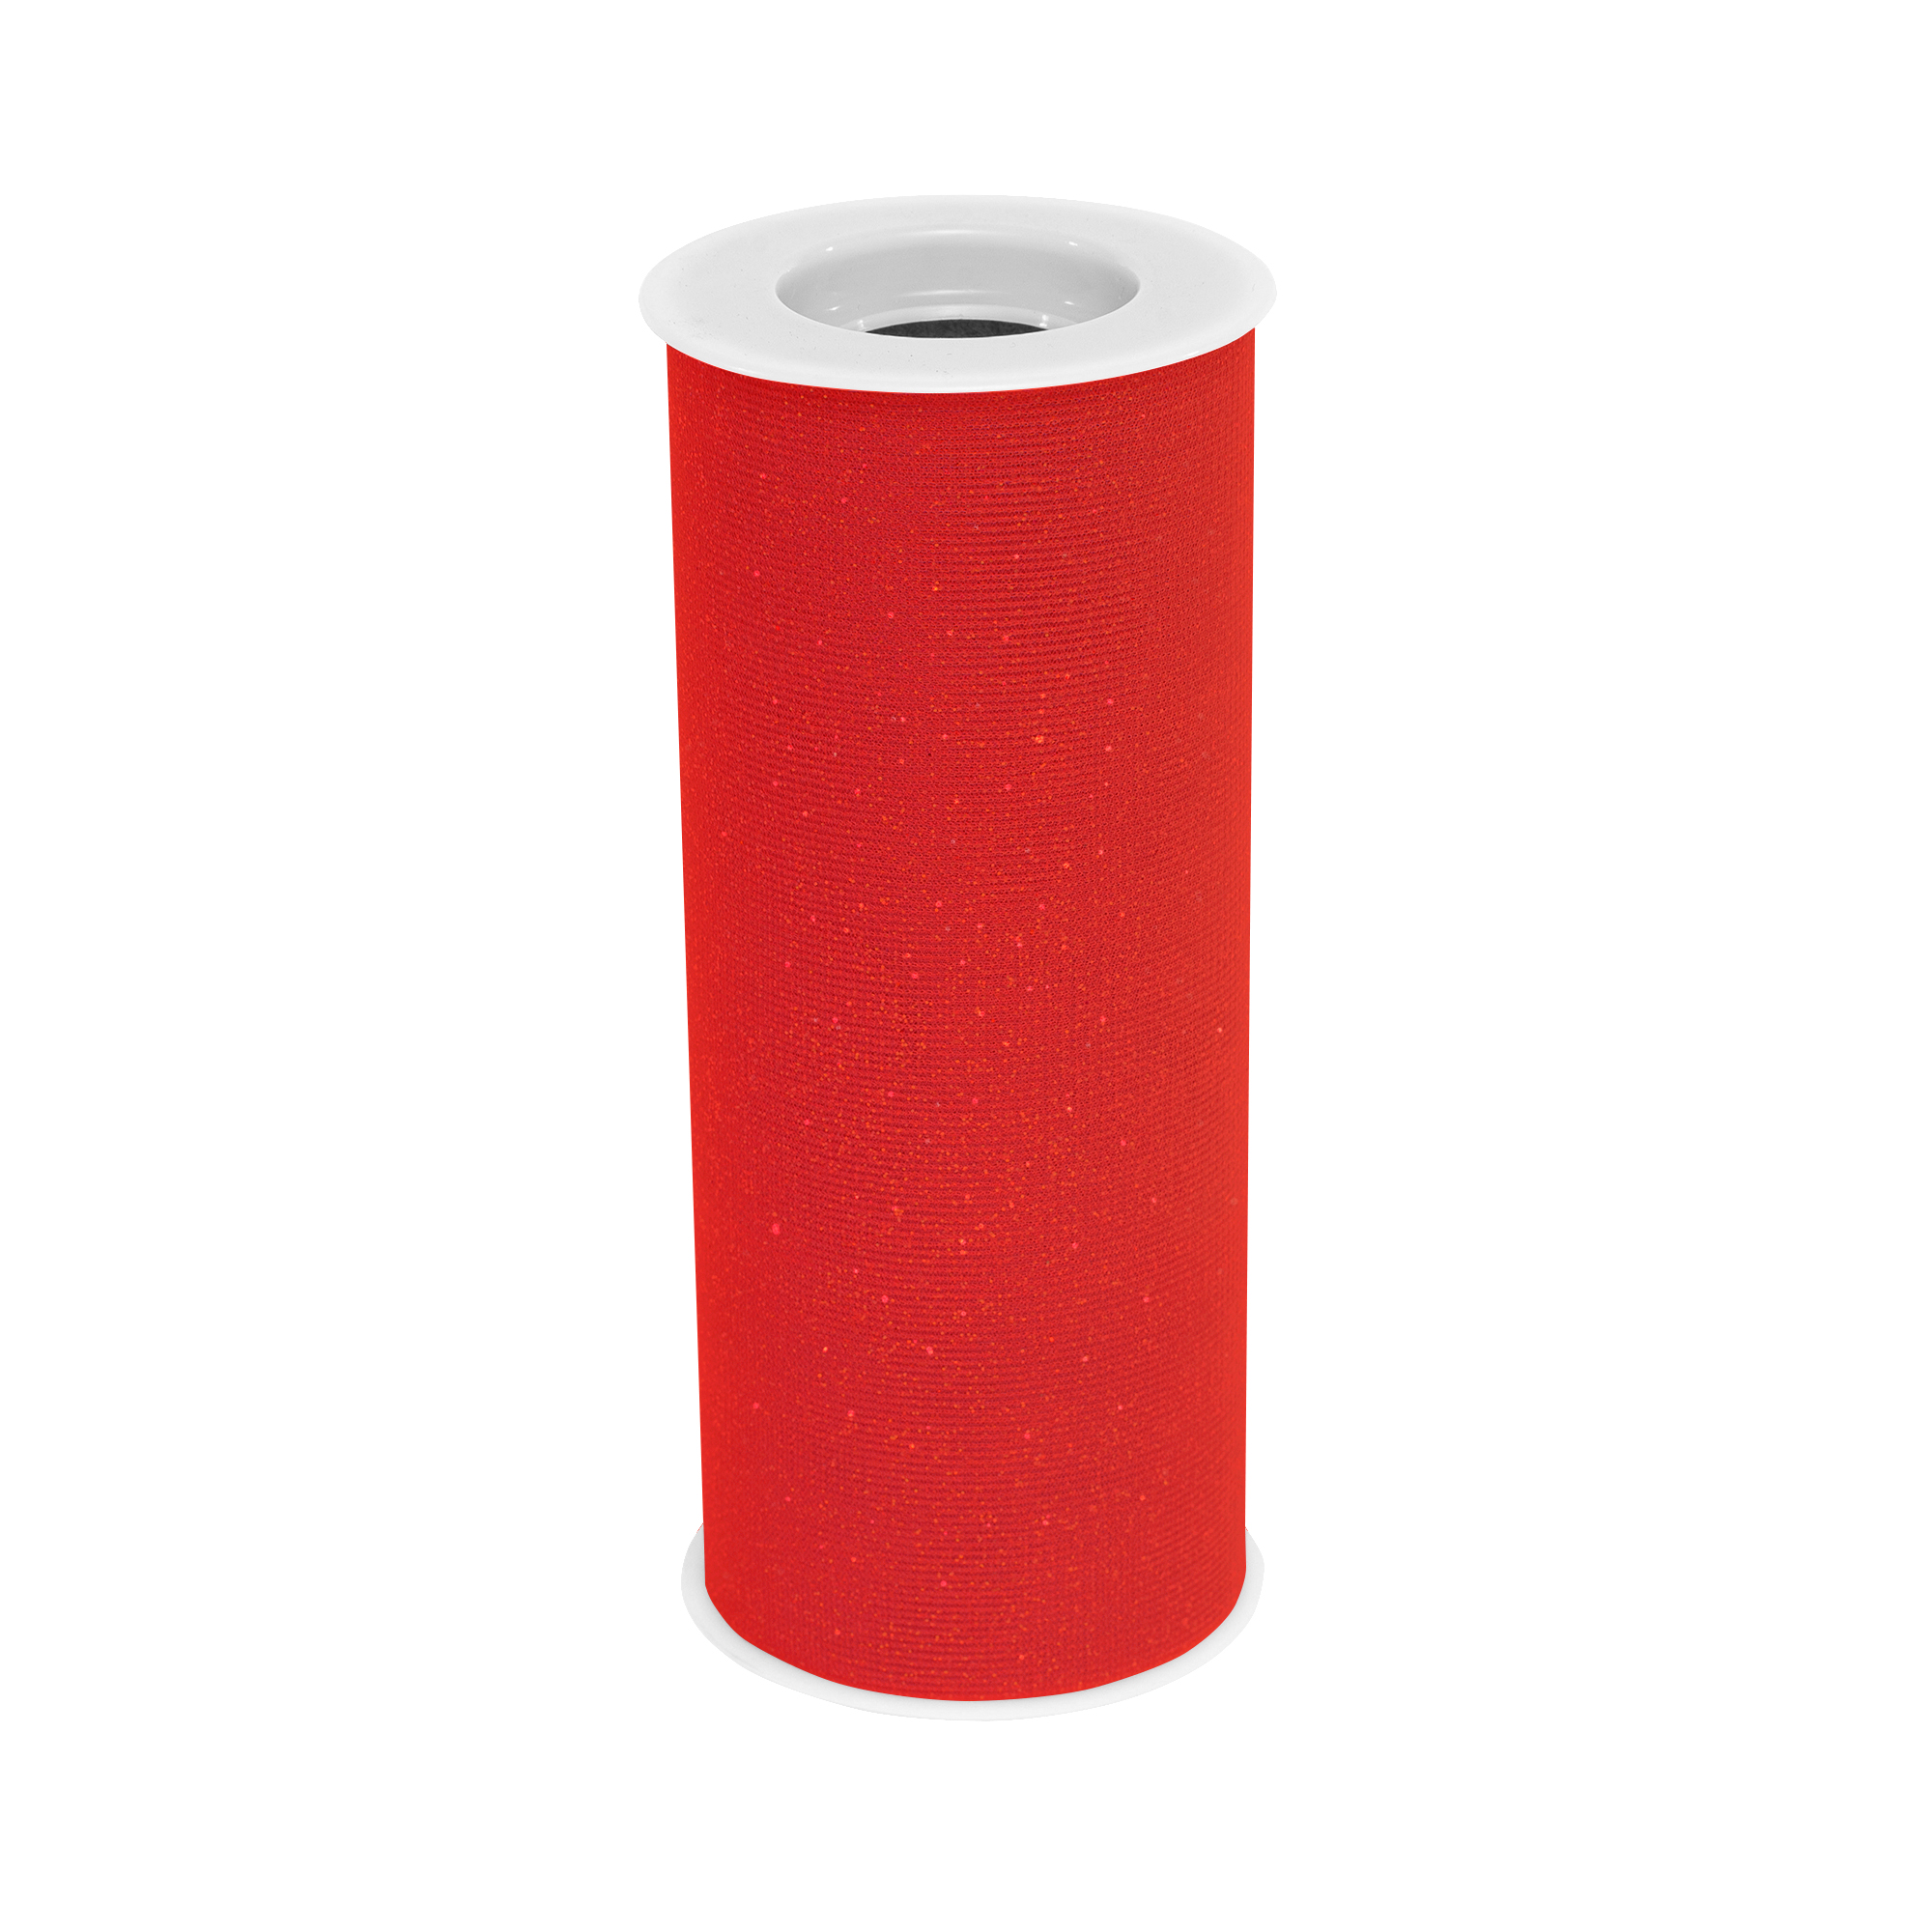 Glittered Tulle Rolls 6" x 25yds - Red